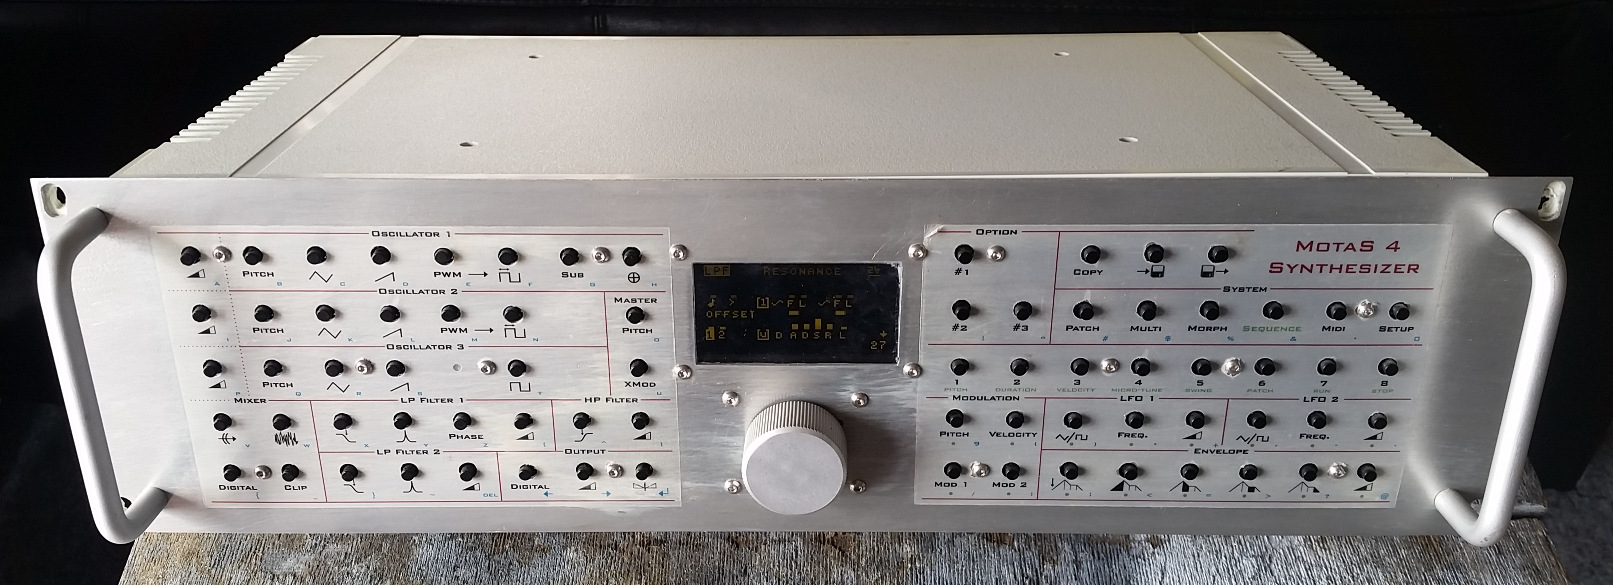 Motas4 analogue synthesizer in an aluminium front finish